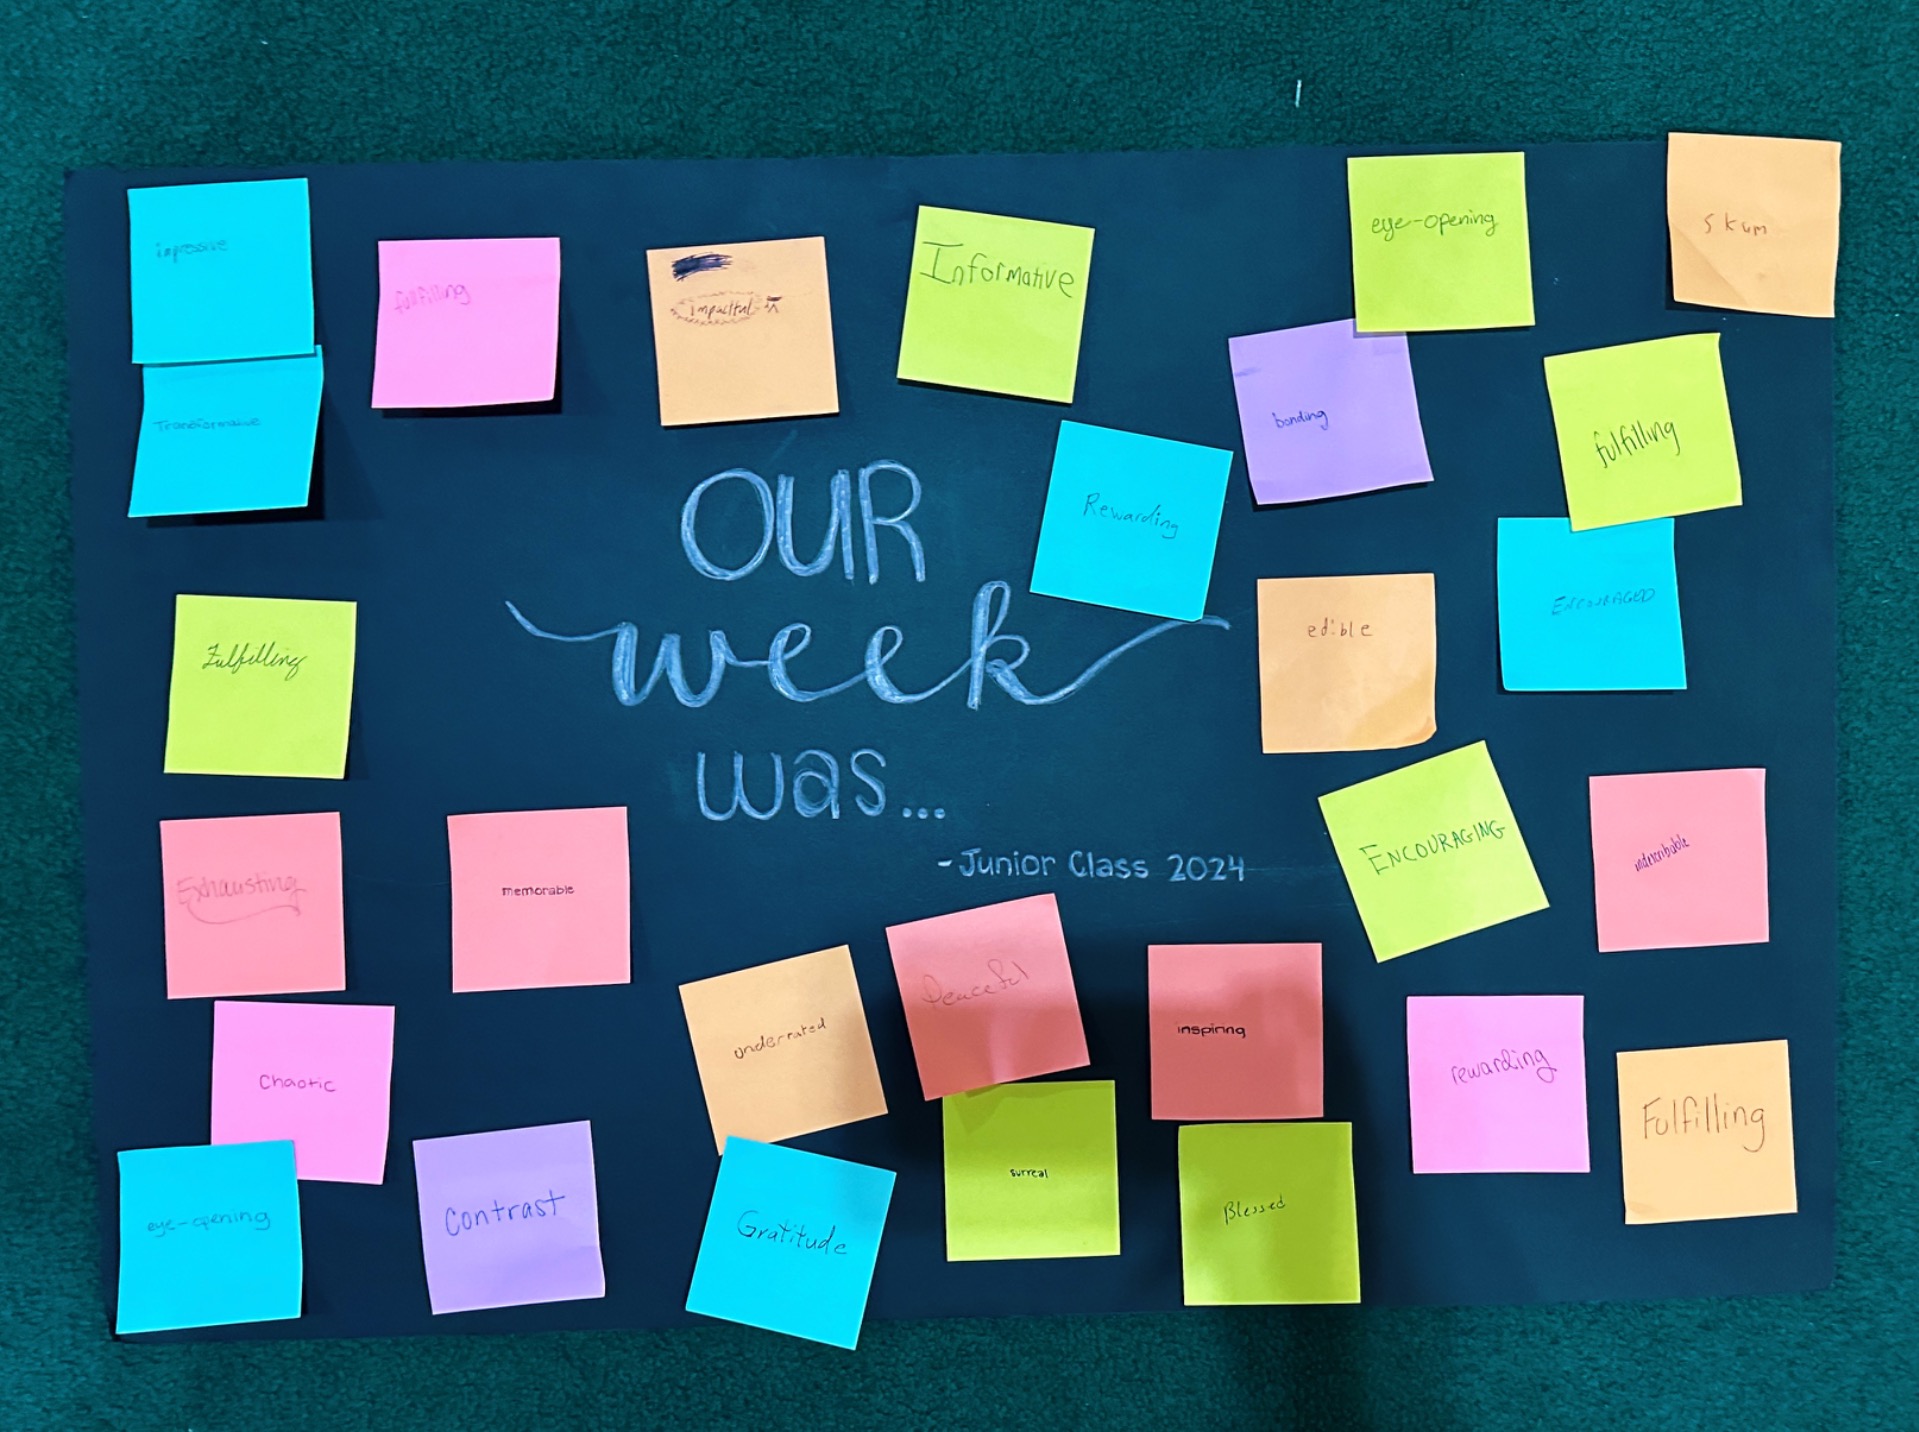 Our Week Was…